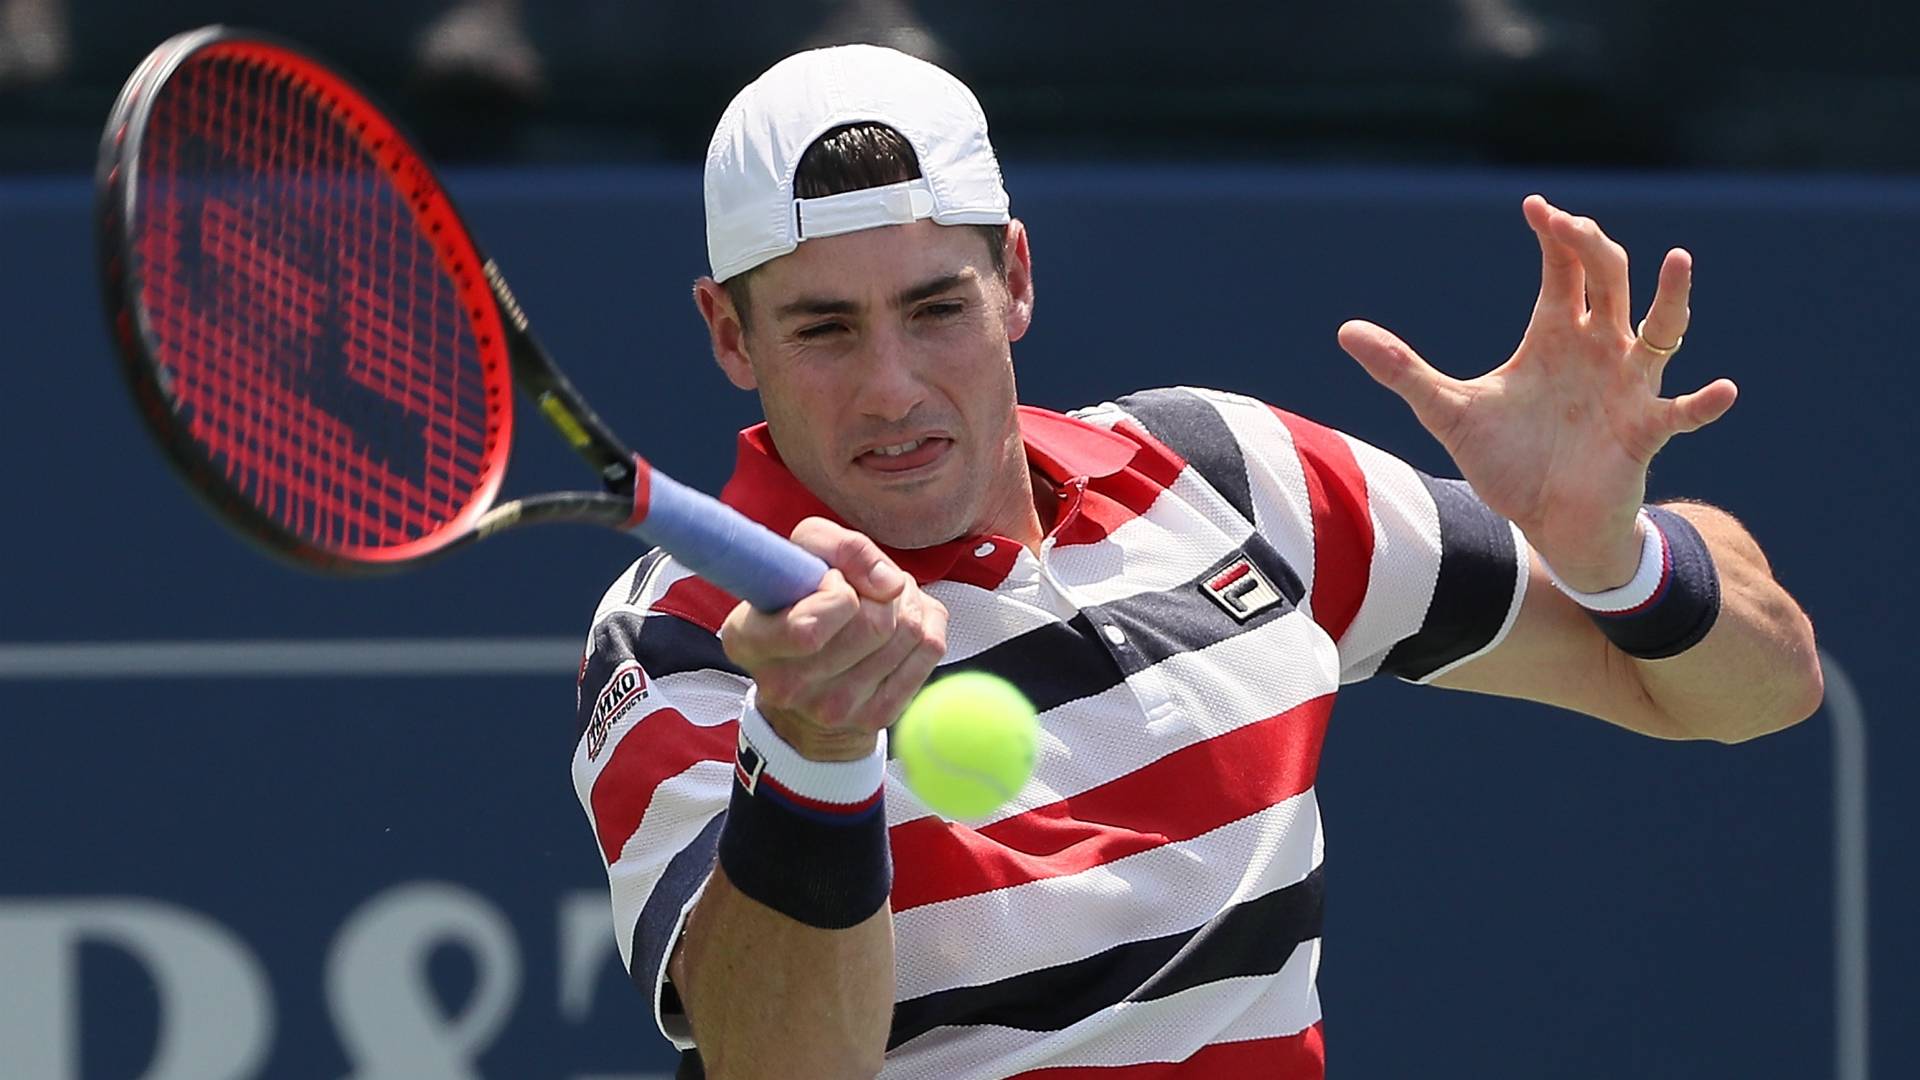 Despite a scare in Stockholm, John Isner remains in contention for a place at the ATP Finals in London.